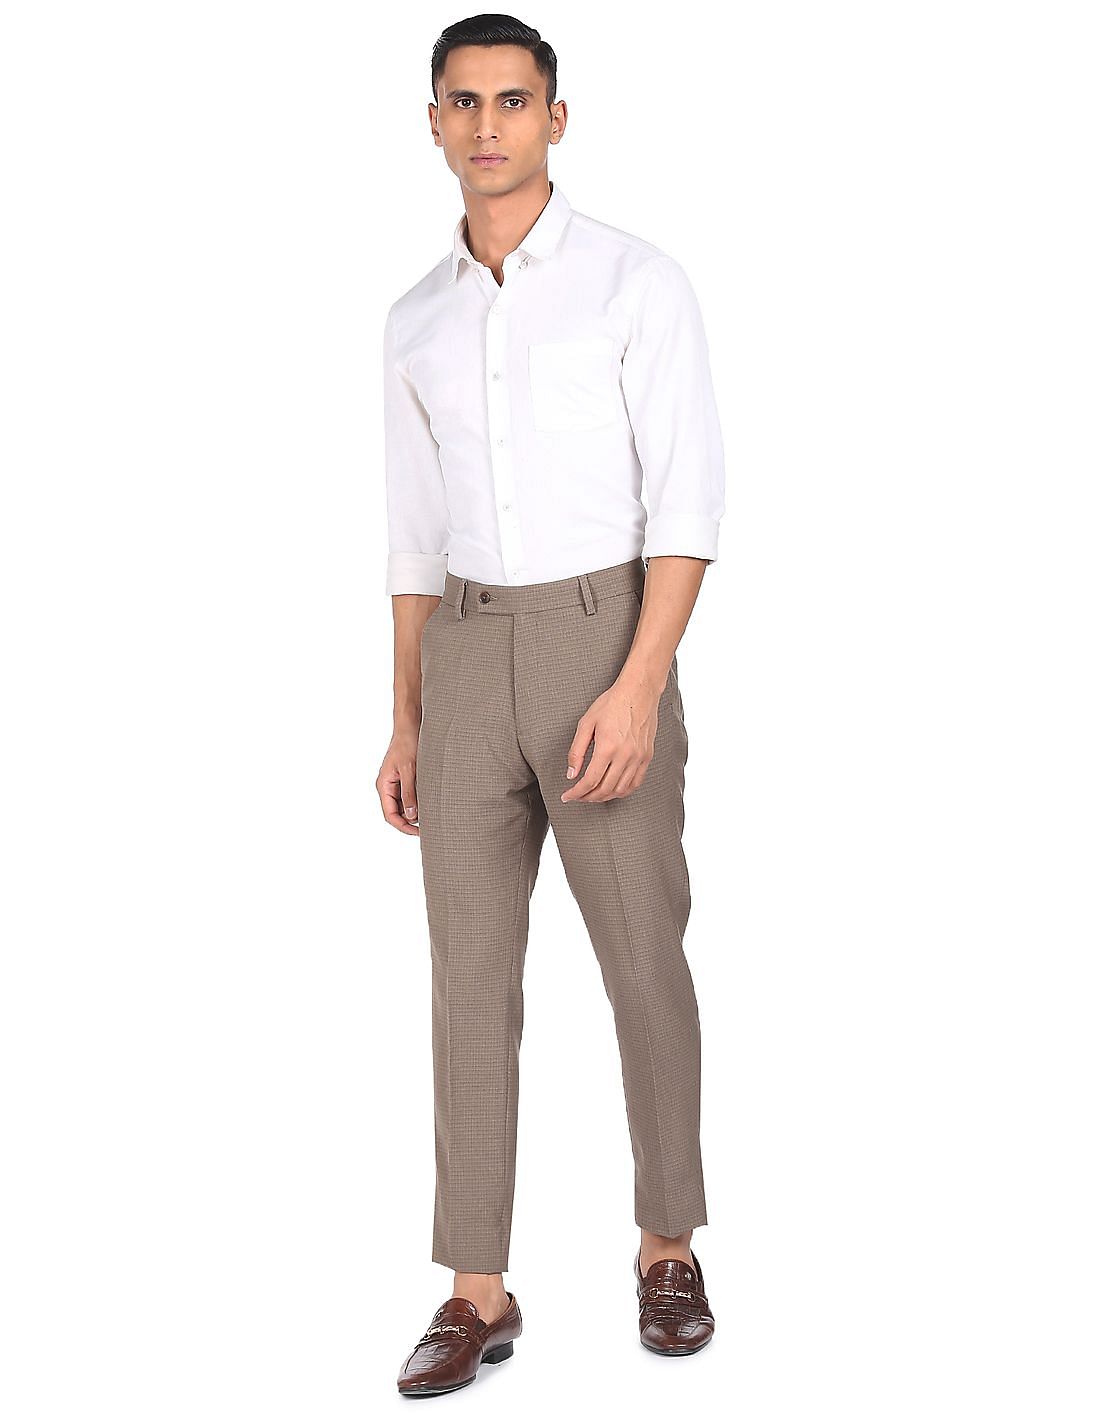 Buy Arrow Patterned Weave Ankle Length Formal Trousers 